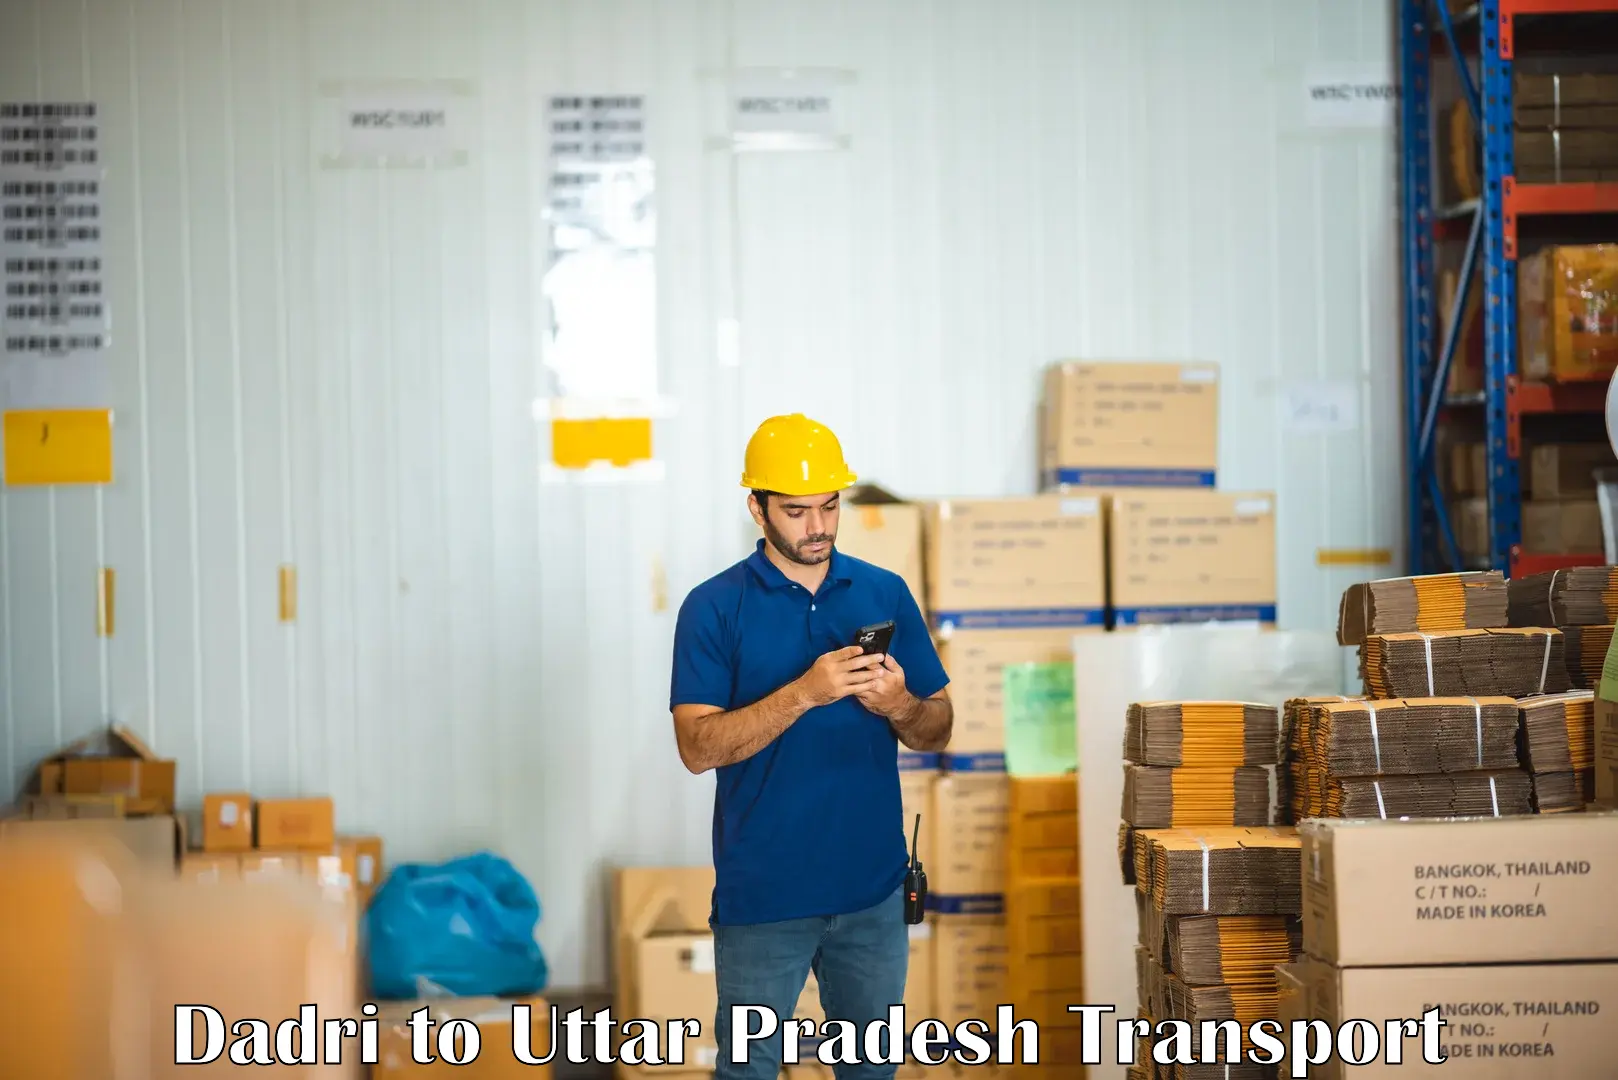 Commercial transport service Dadri to Aligarh